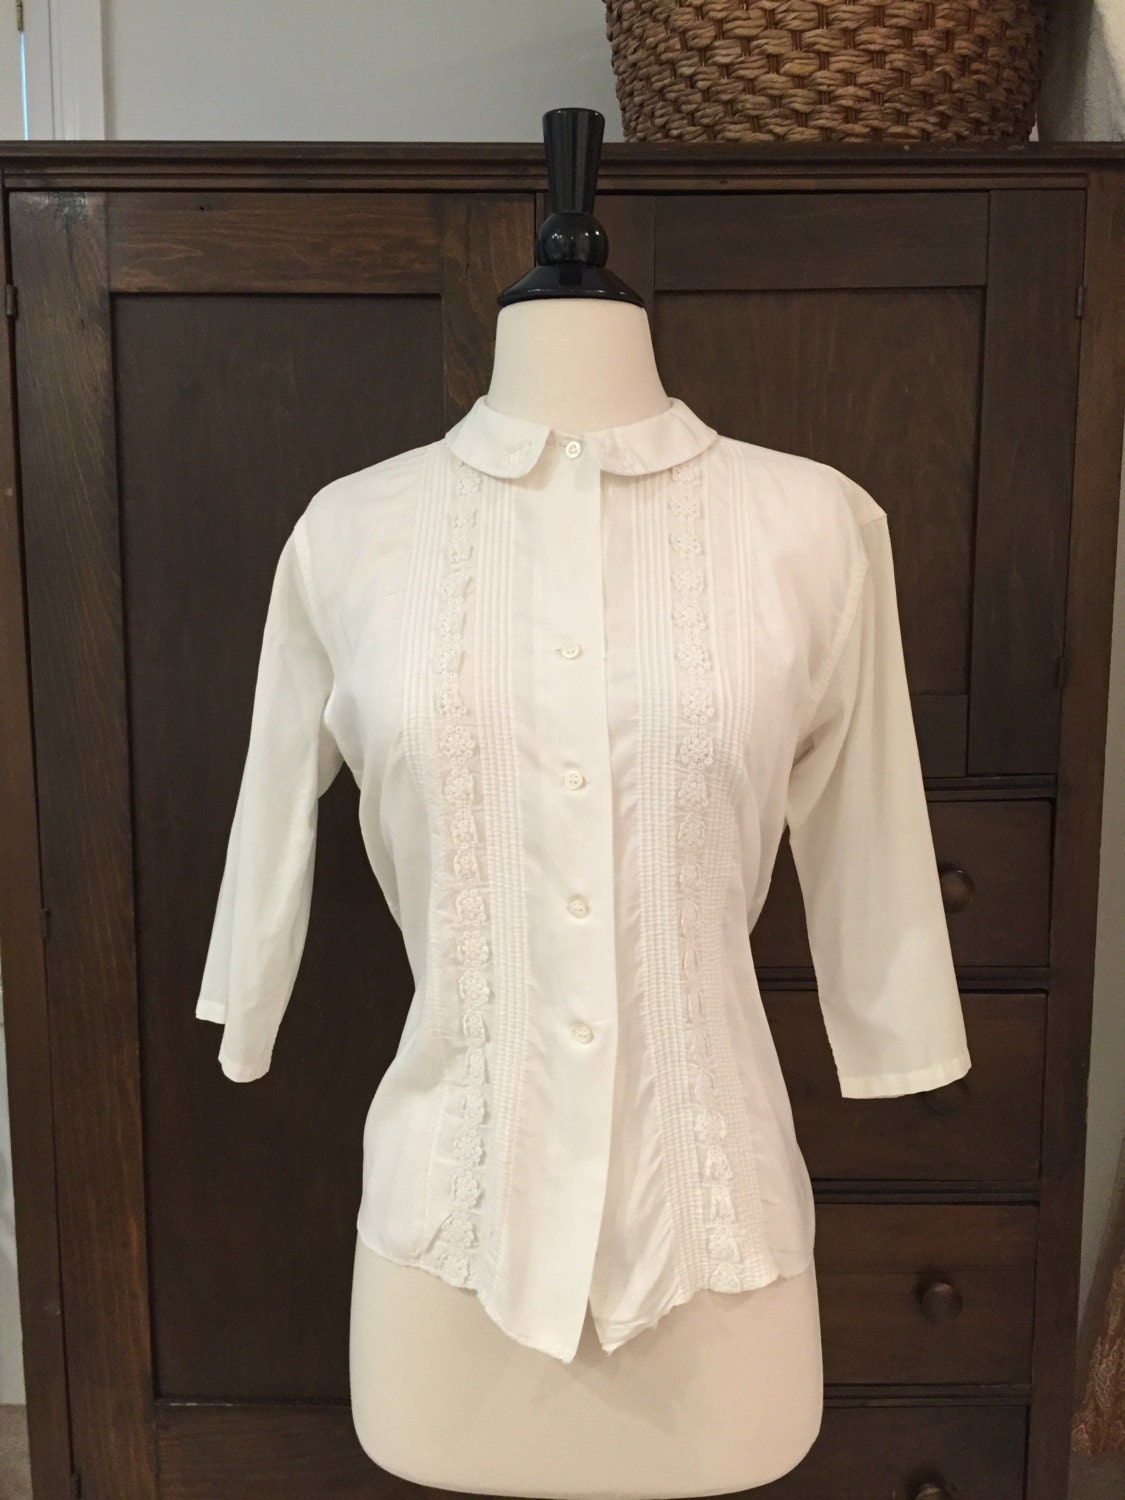 1960's White Cotton Blouse with 3/4 Length Sleeves